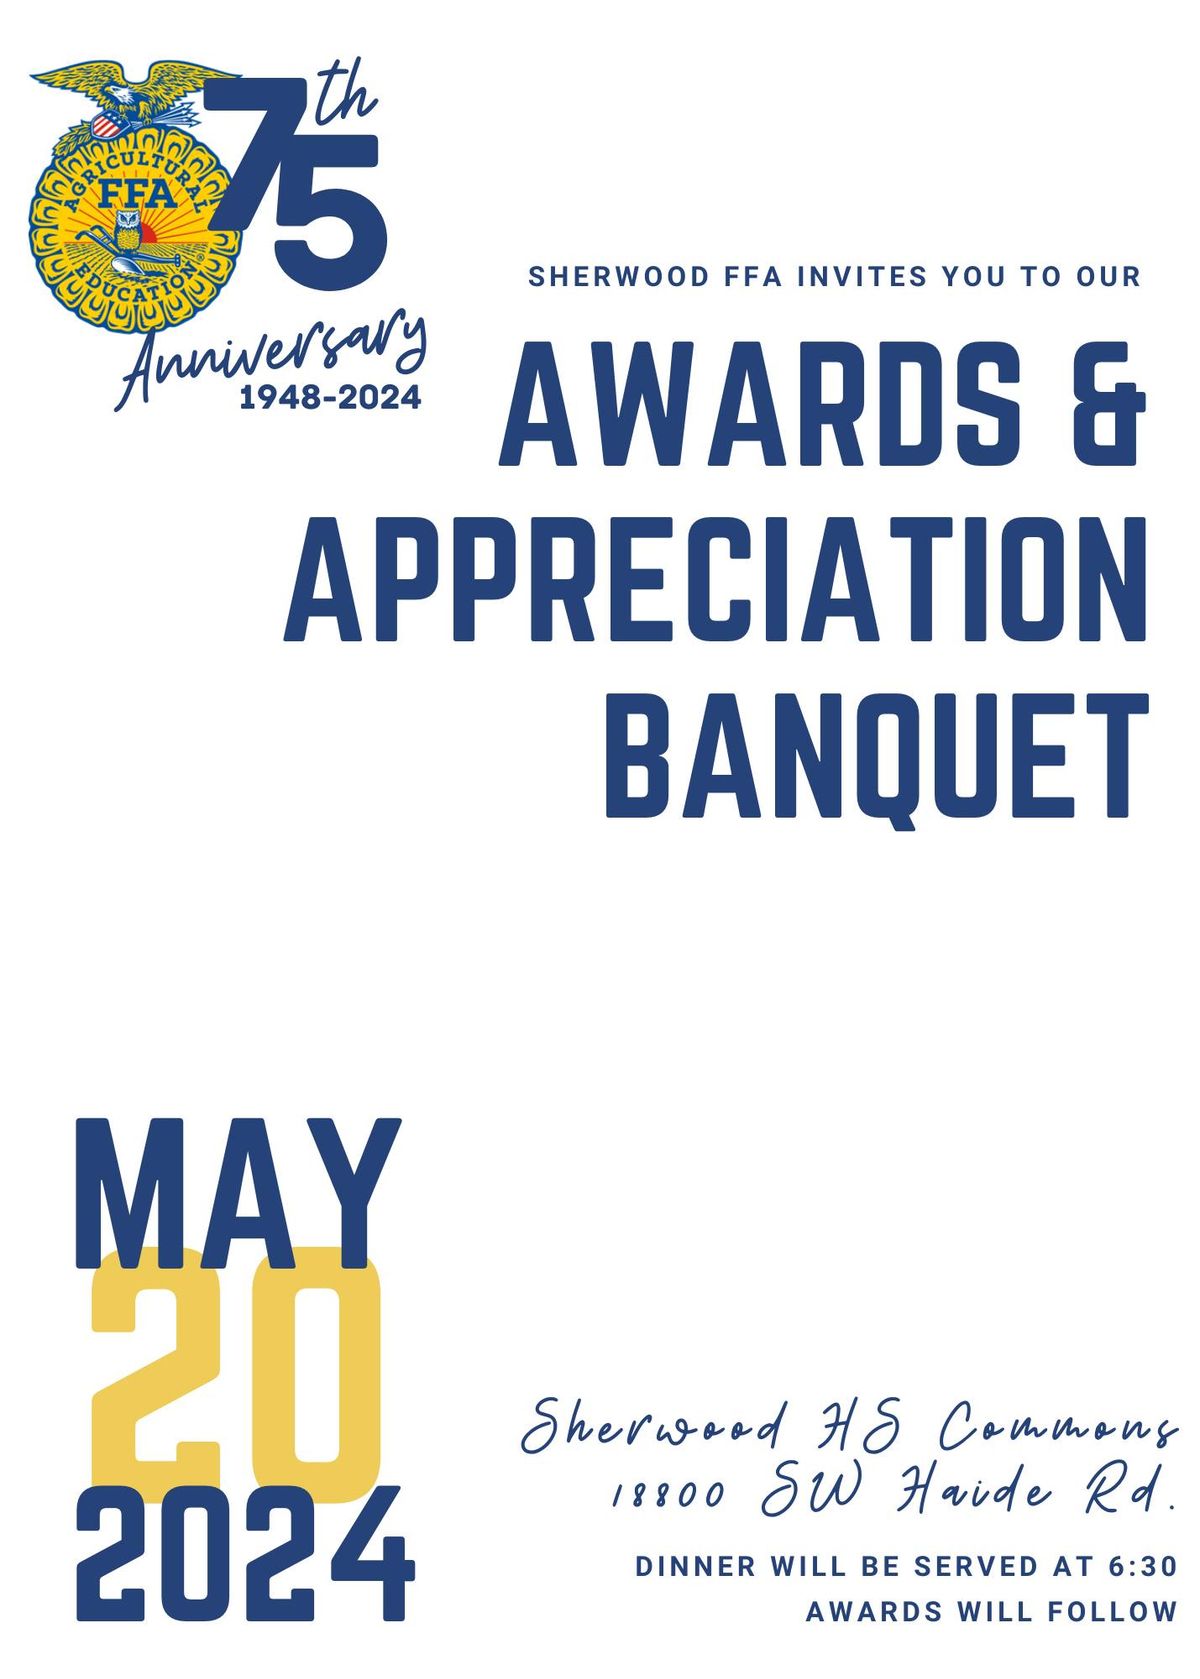 SAVE THE DATE: Sherwood FFA 75th Anniversary Banquet